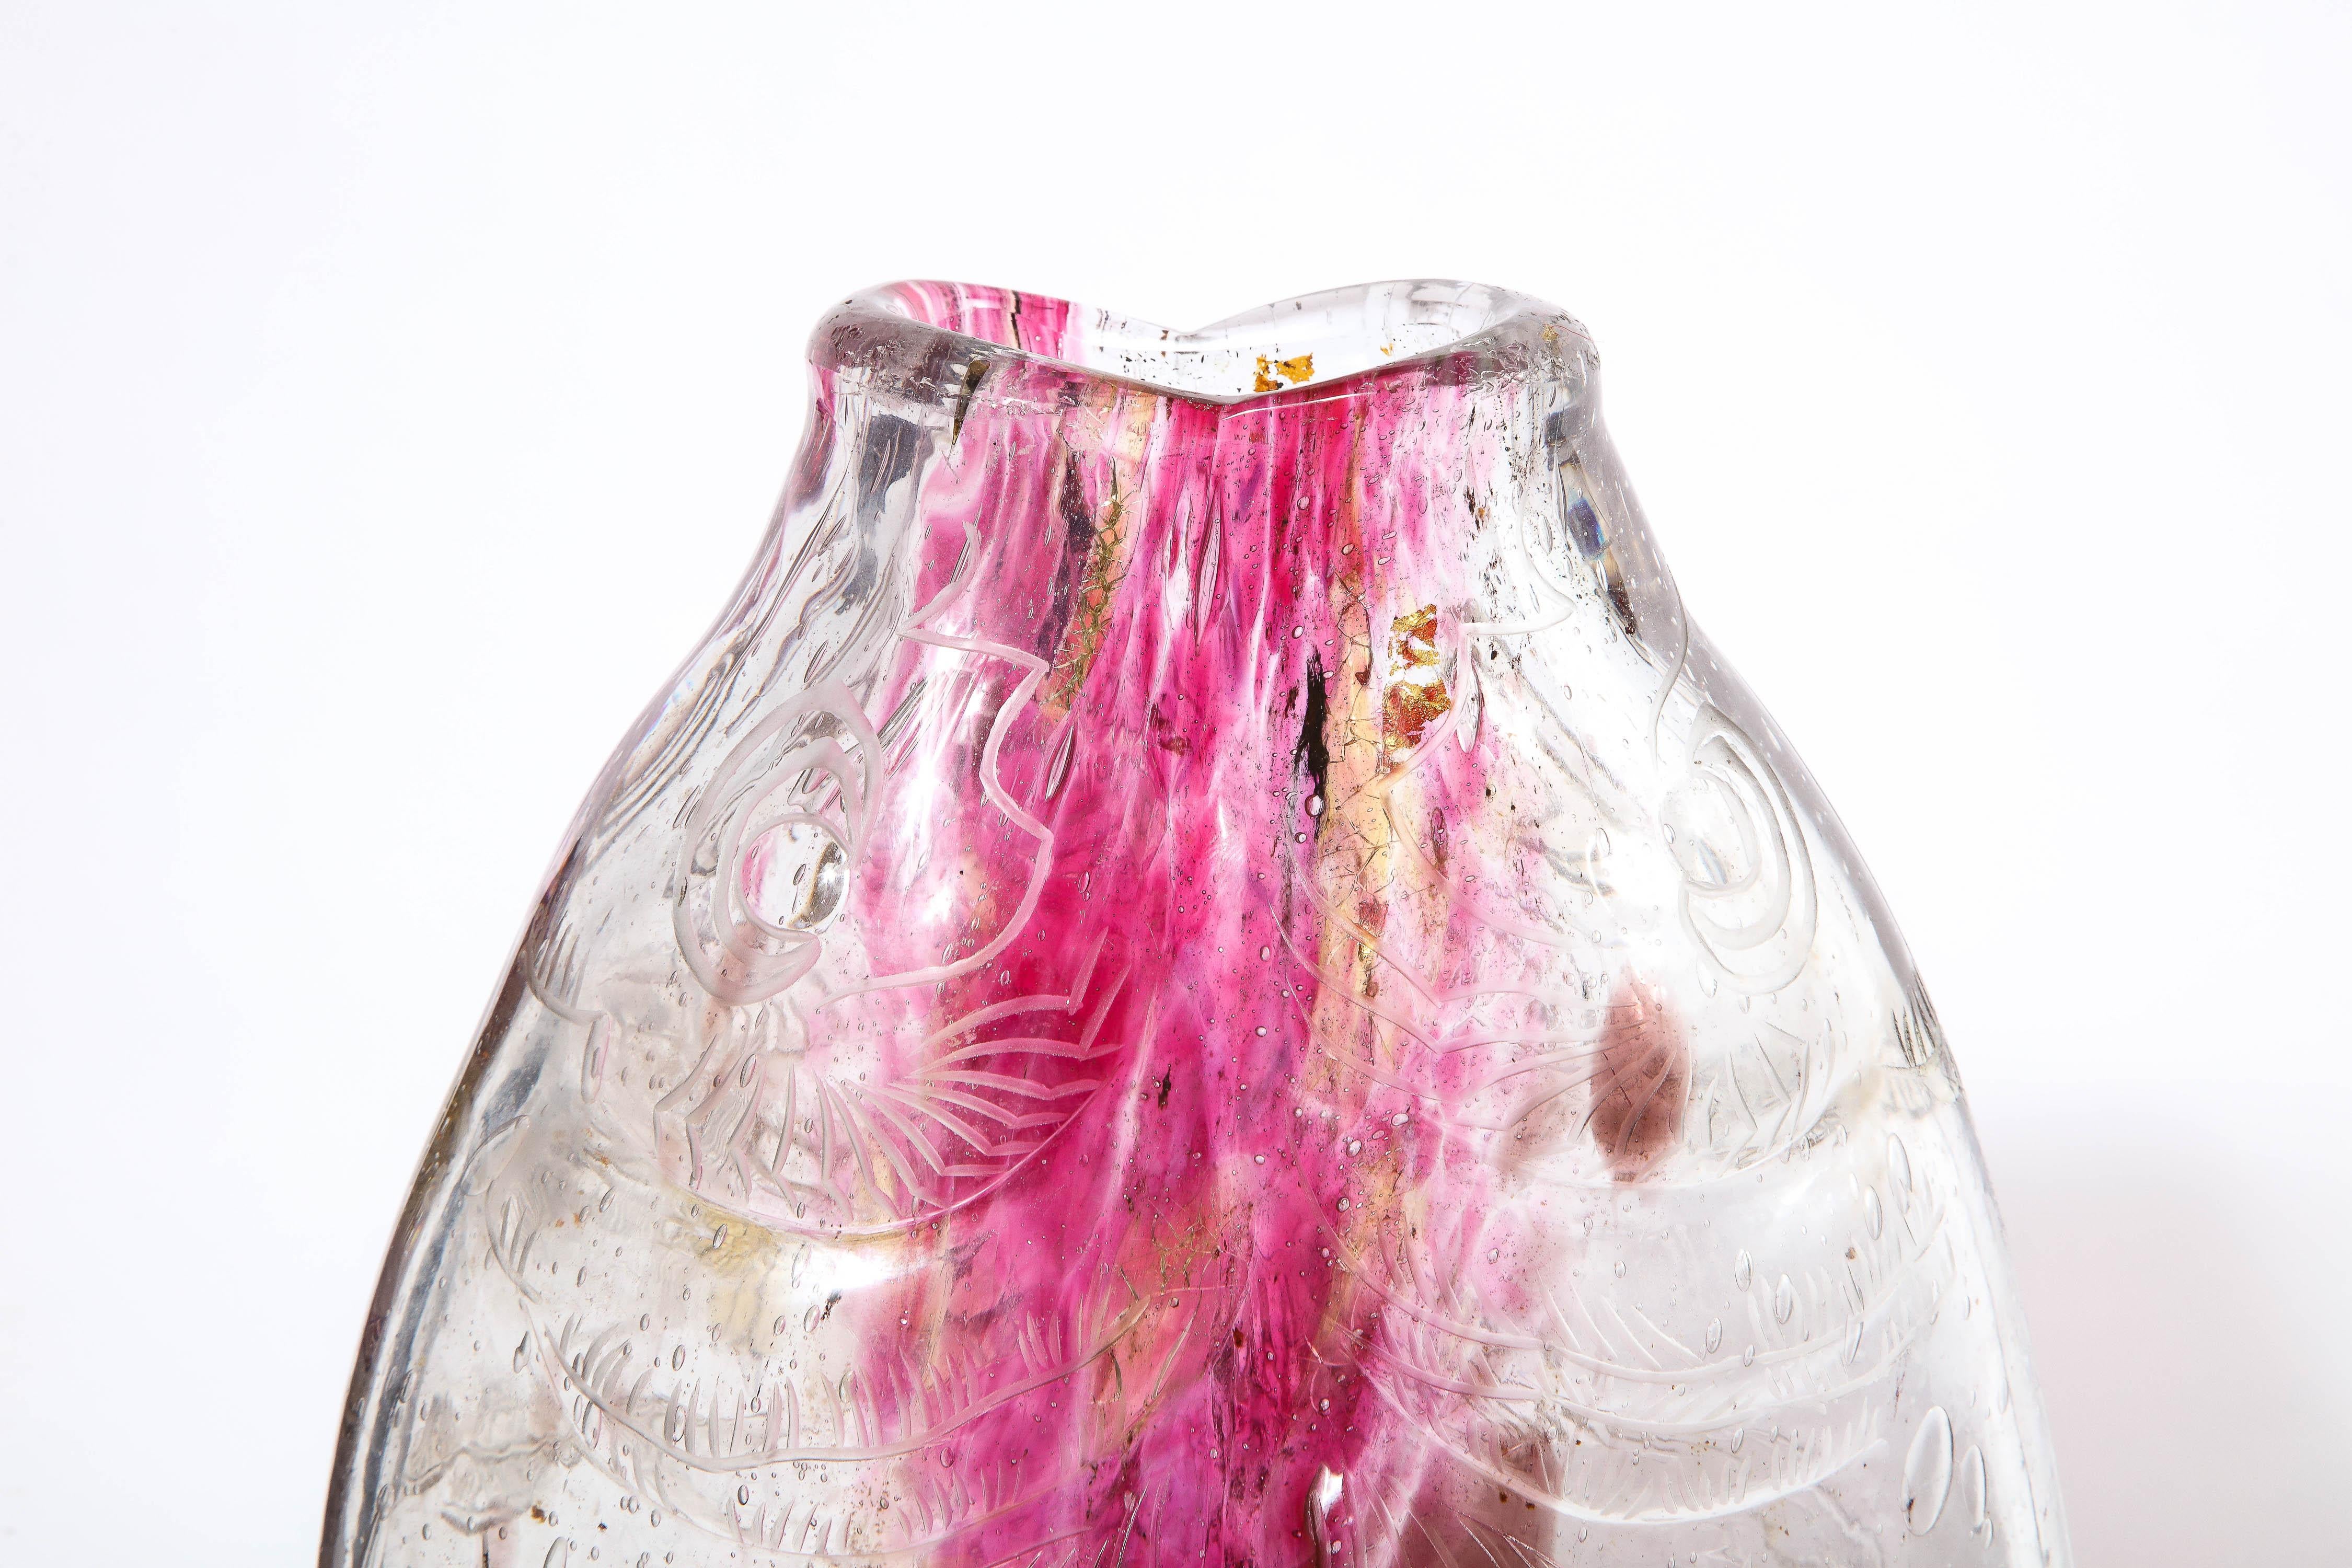 Emile Galle, A Rare & Important Ormolu-Mounted Double Carp Fish Pink-Glass Vase For Sale 3